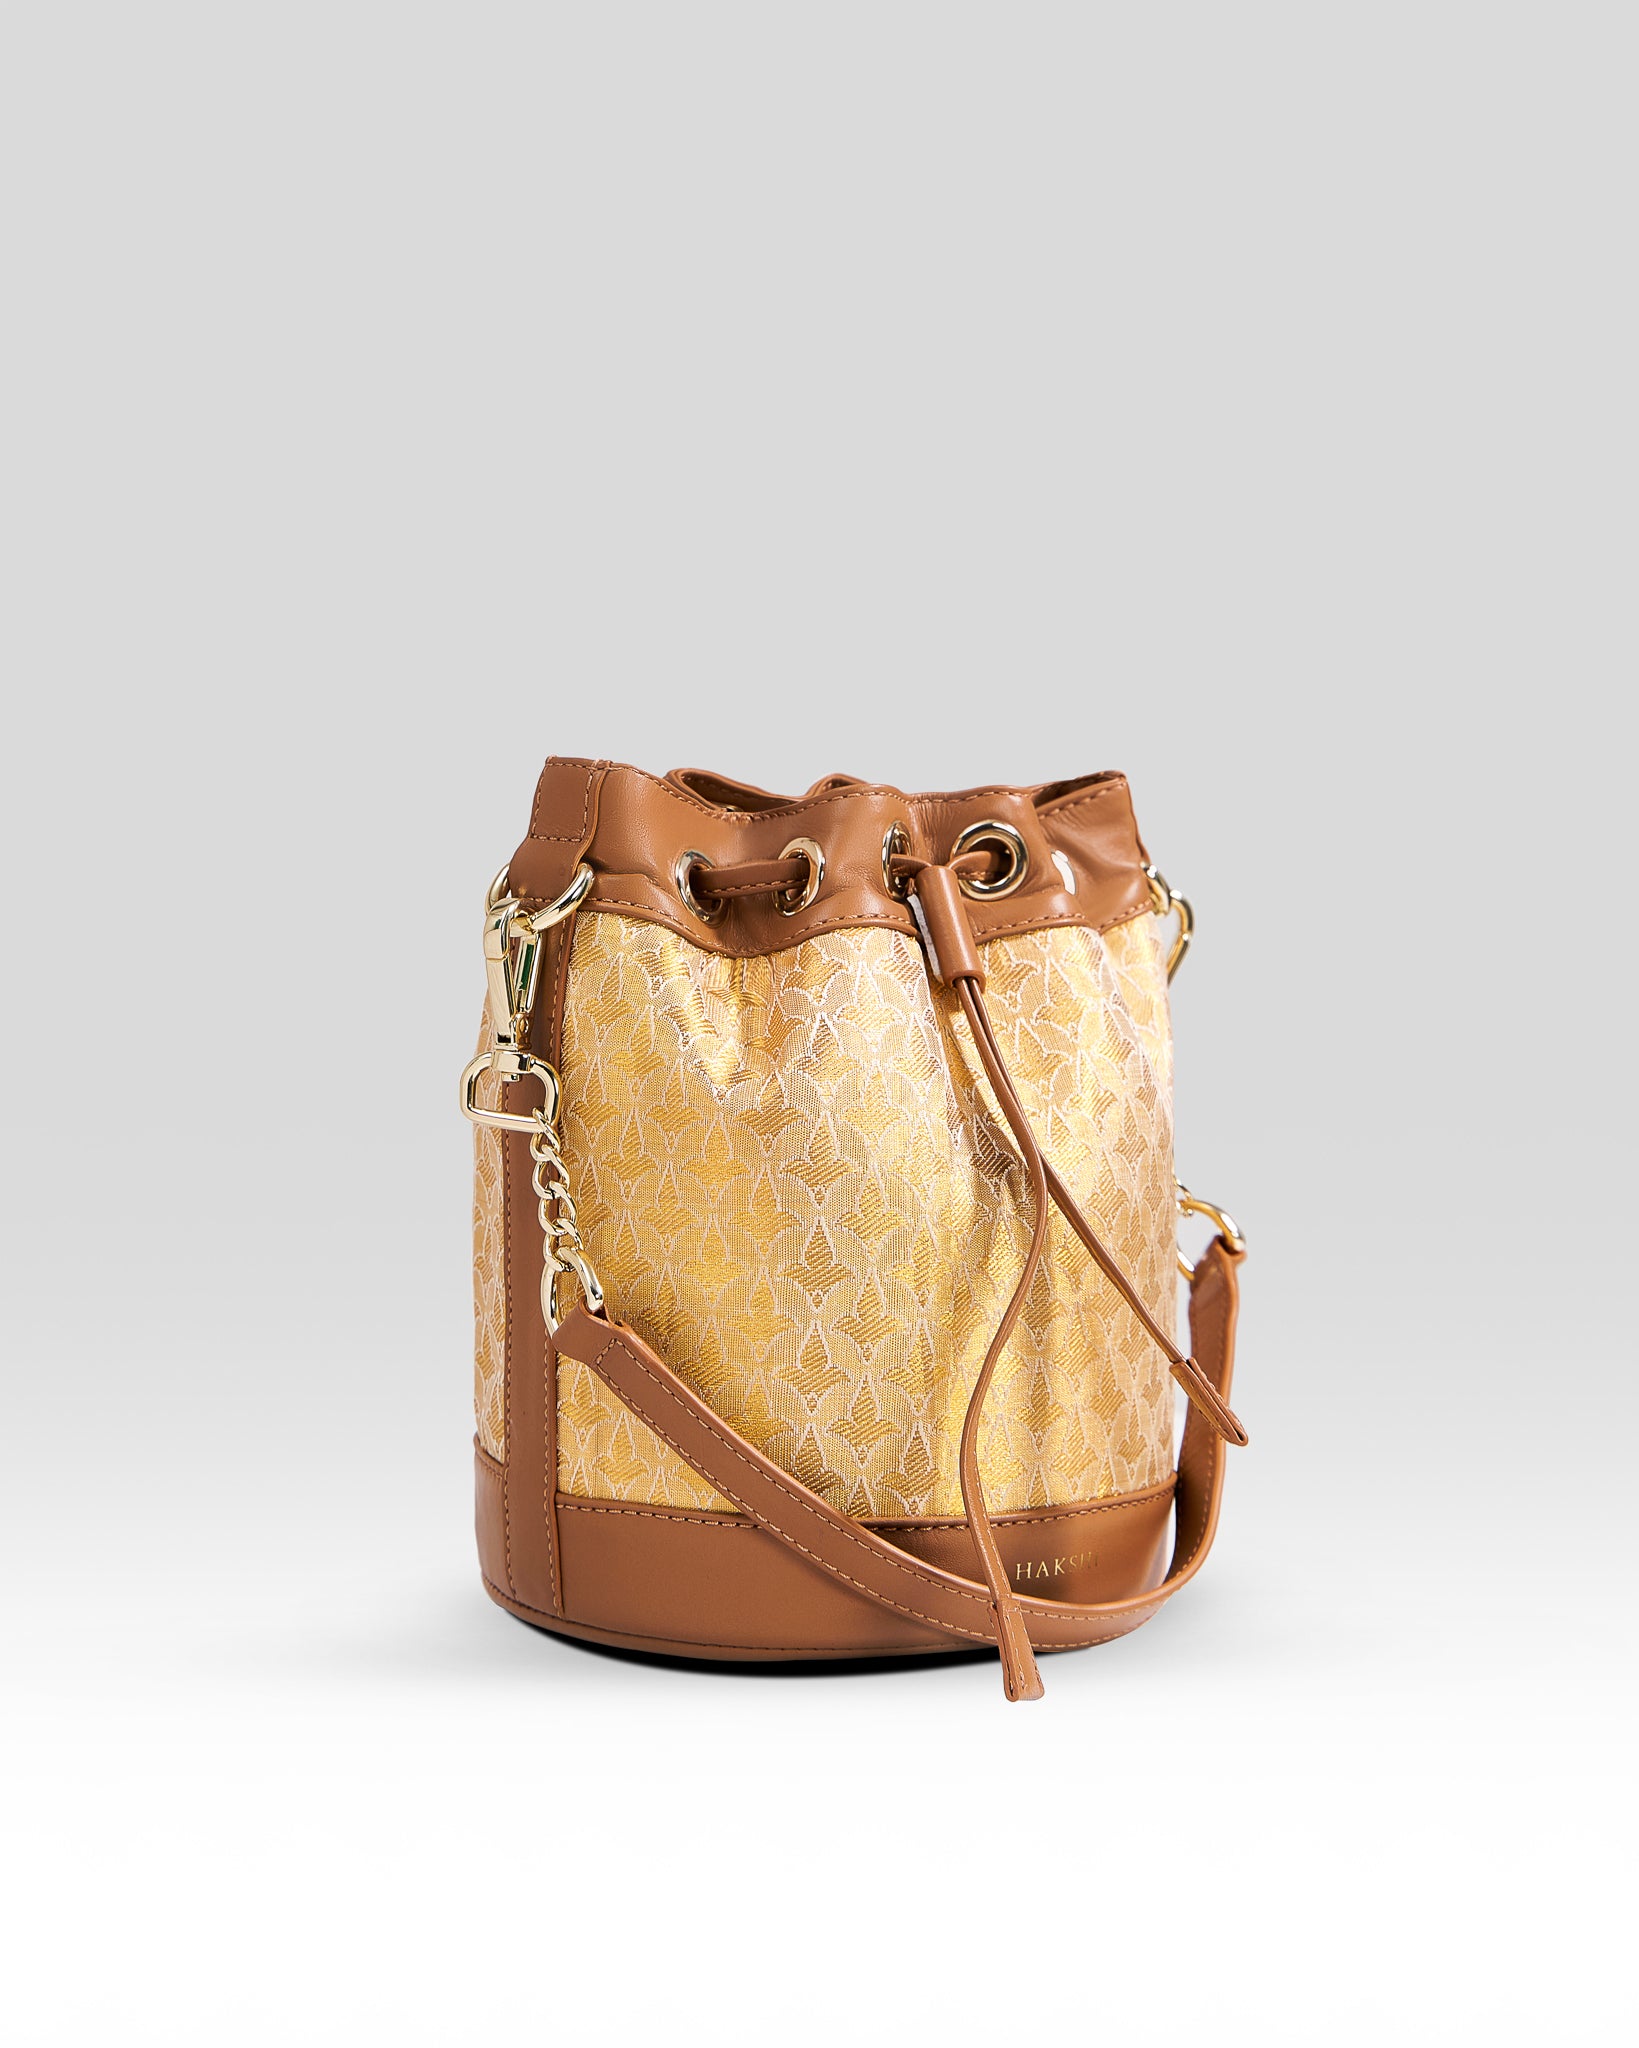 Potli Bag resting elegantly on the floor, showcasing its intricate design and cultural charm.